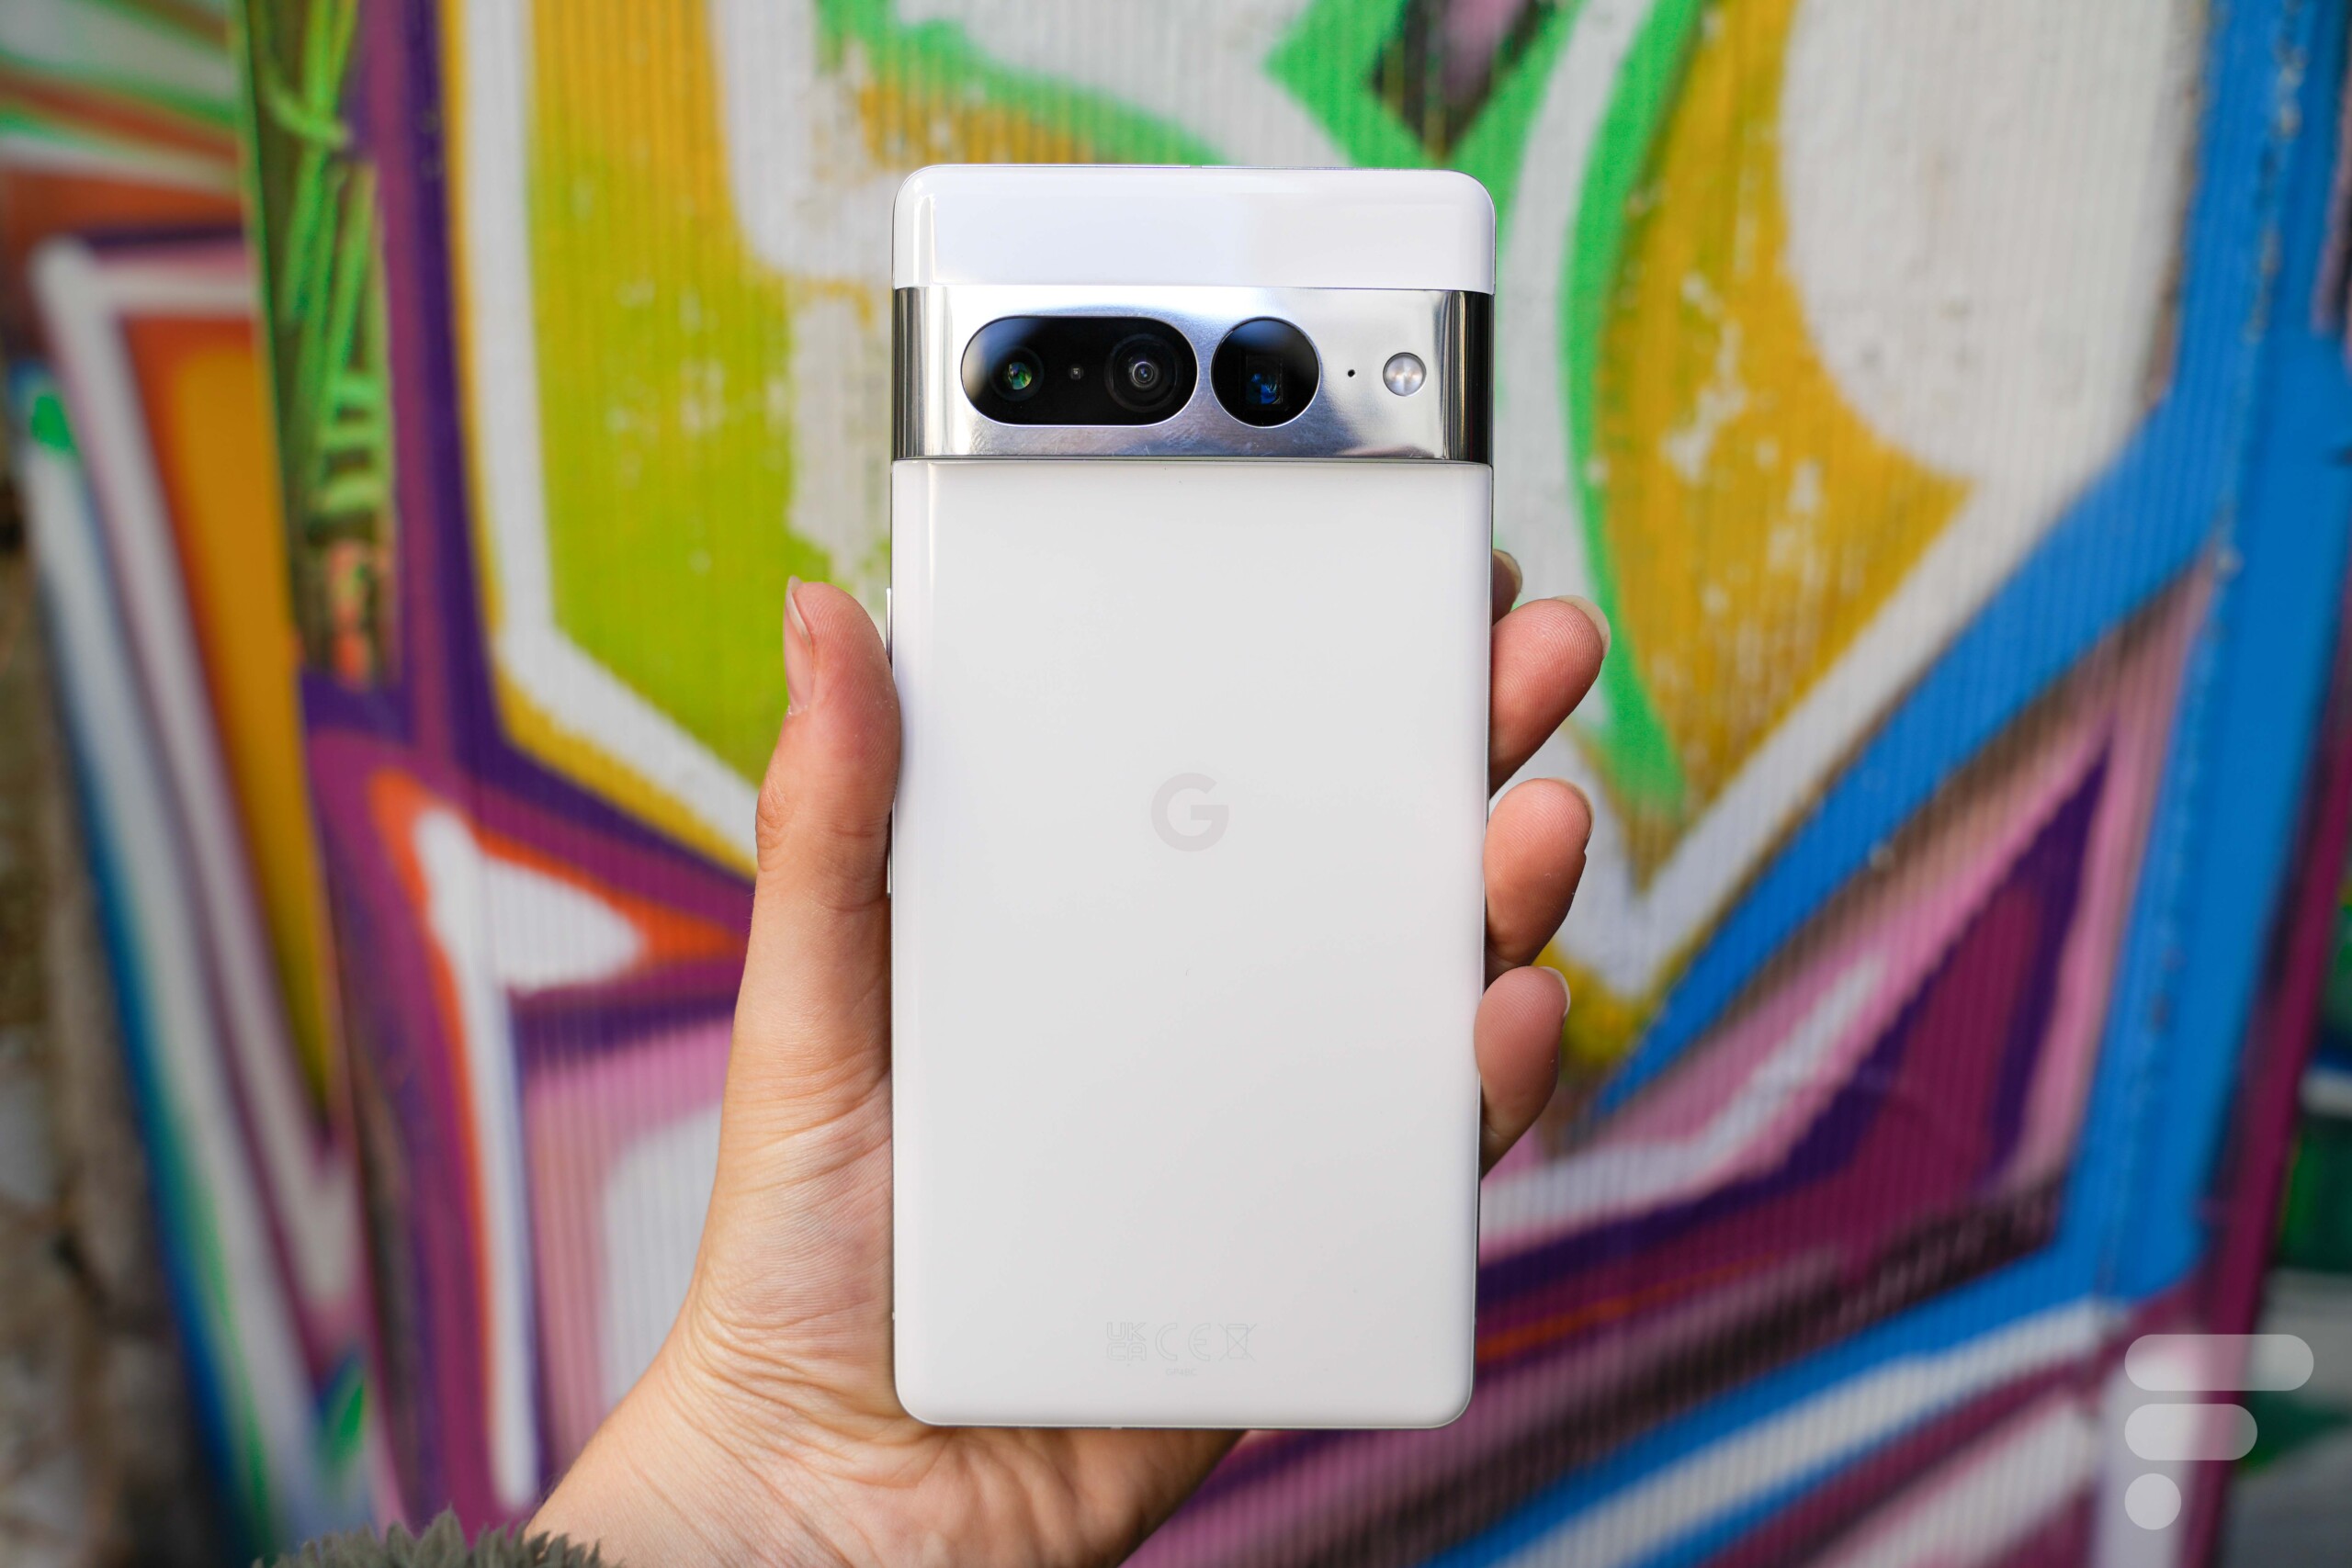 The Pixel 7a really wouldn’t be cheap and could kill the Pixel 7 and 7 Pro